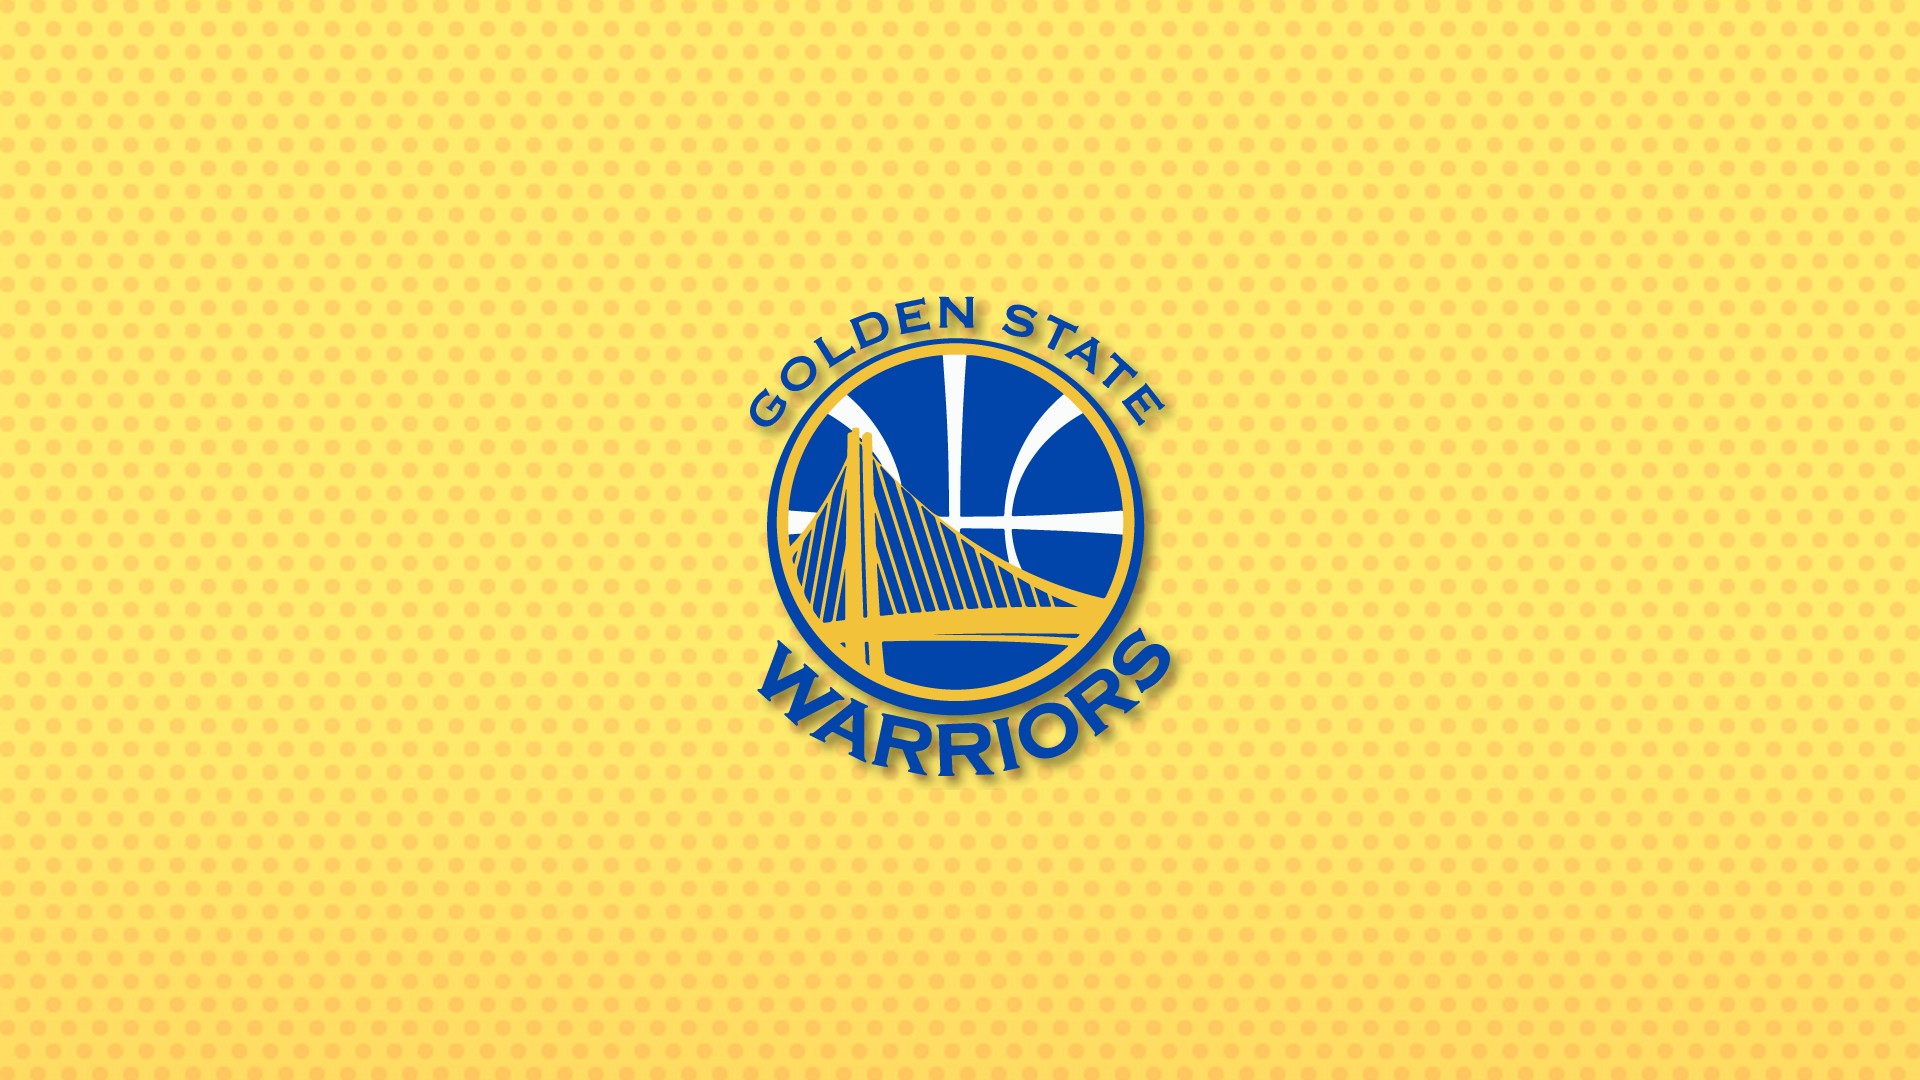 HD Wallpaper Golden State Warriors with image resolution 1920x1080 pixel. You can make this wallpaper for your Desktop Computer Backgrounds, Mac Wallpapers, Android Lock screen or iPhone Screensavers